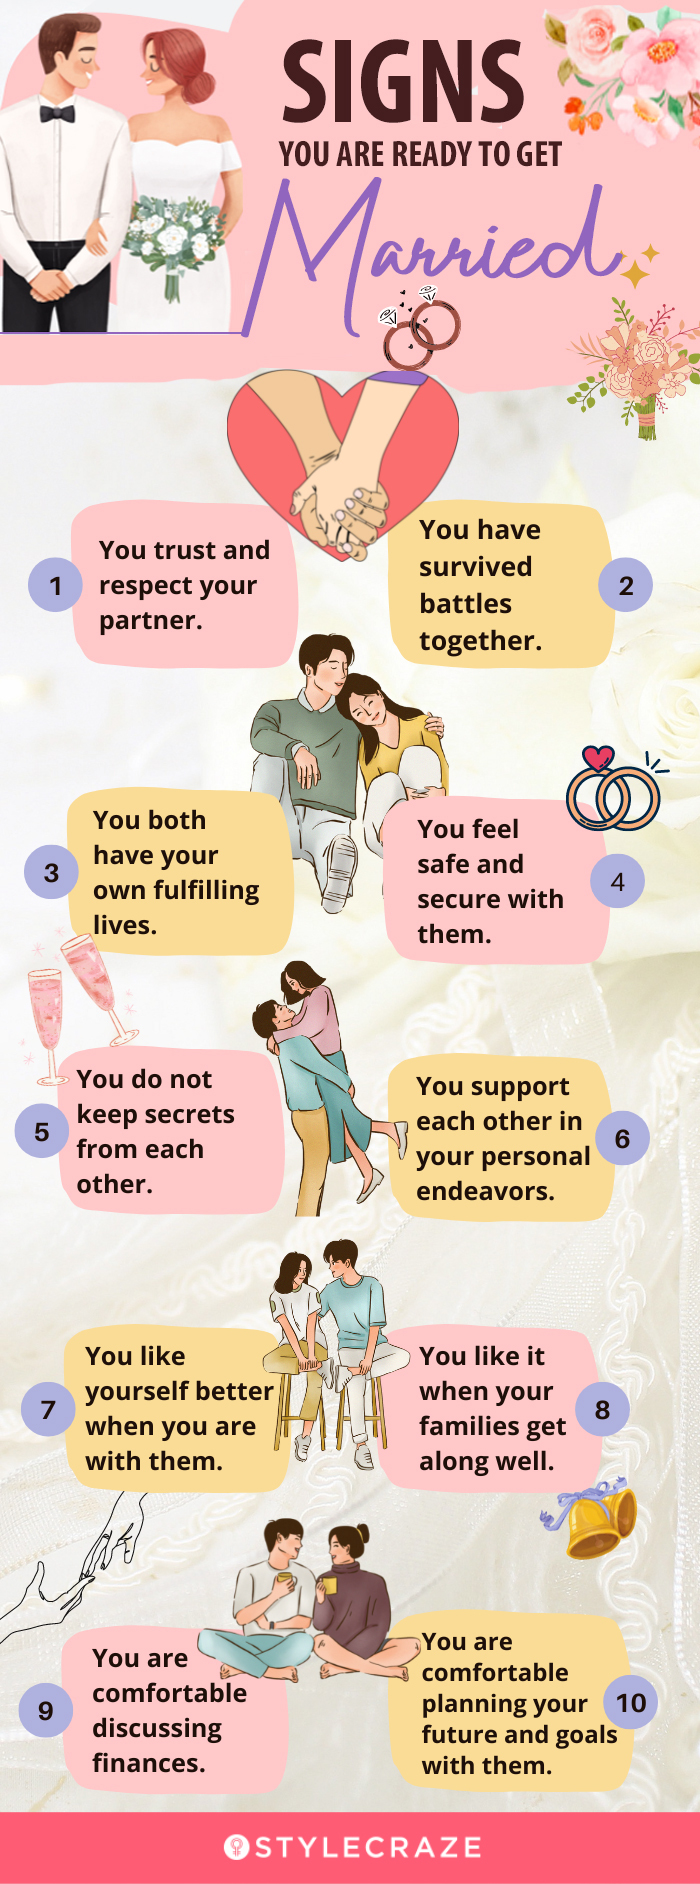 signs you are ready to get married (infographic)